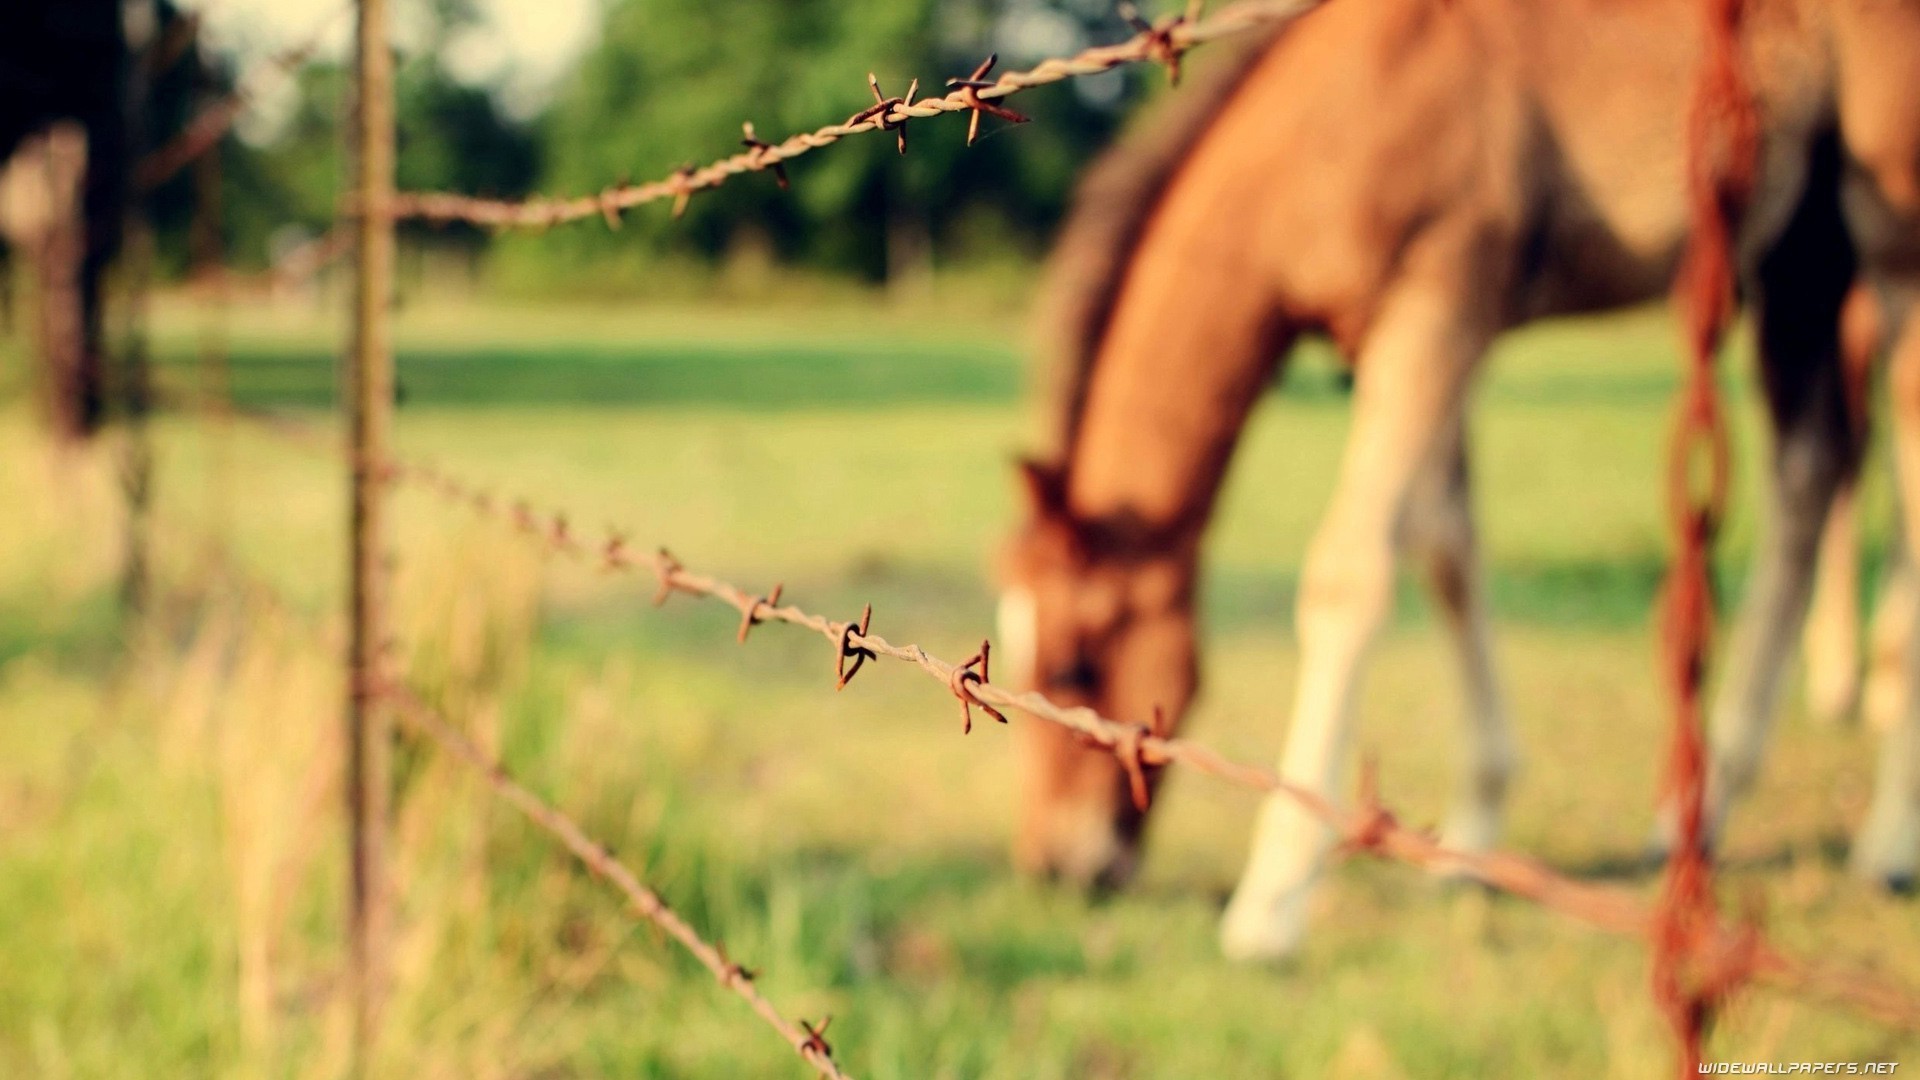 General 1920x1080 animals nature horse fence depth of field mammals